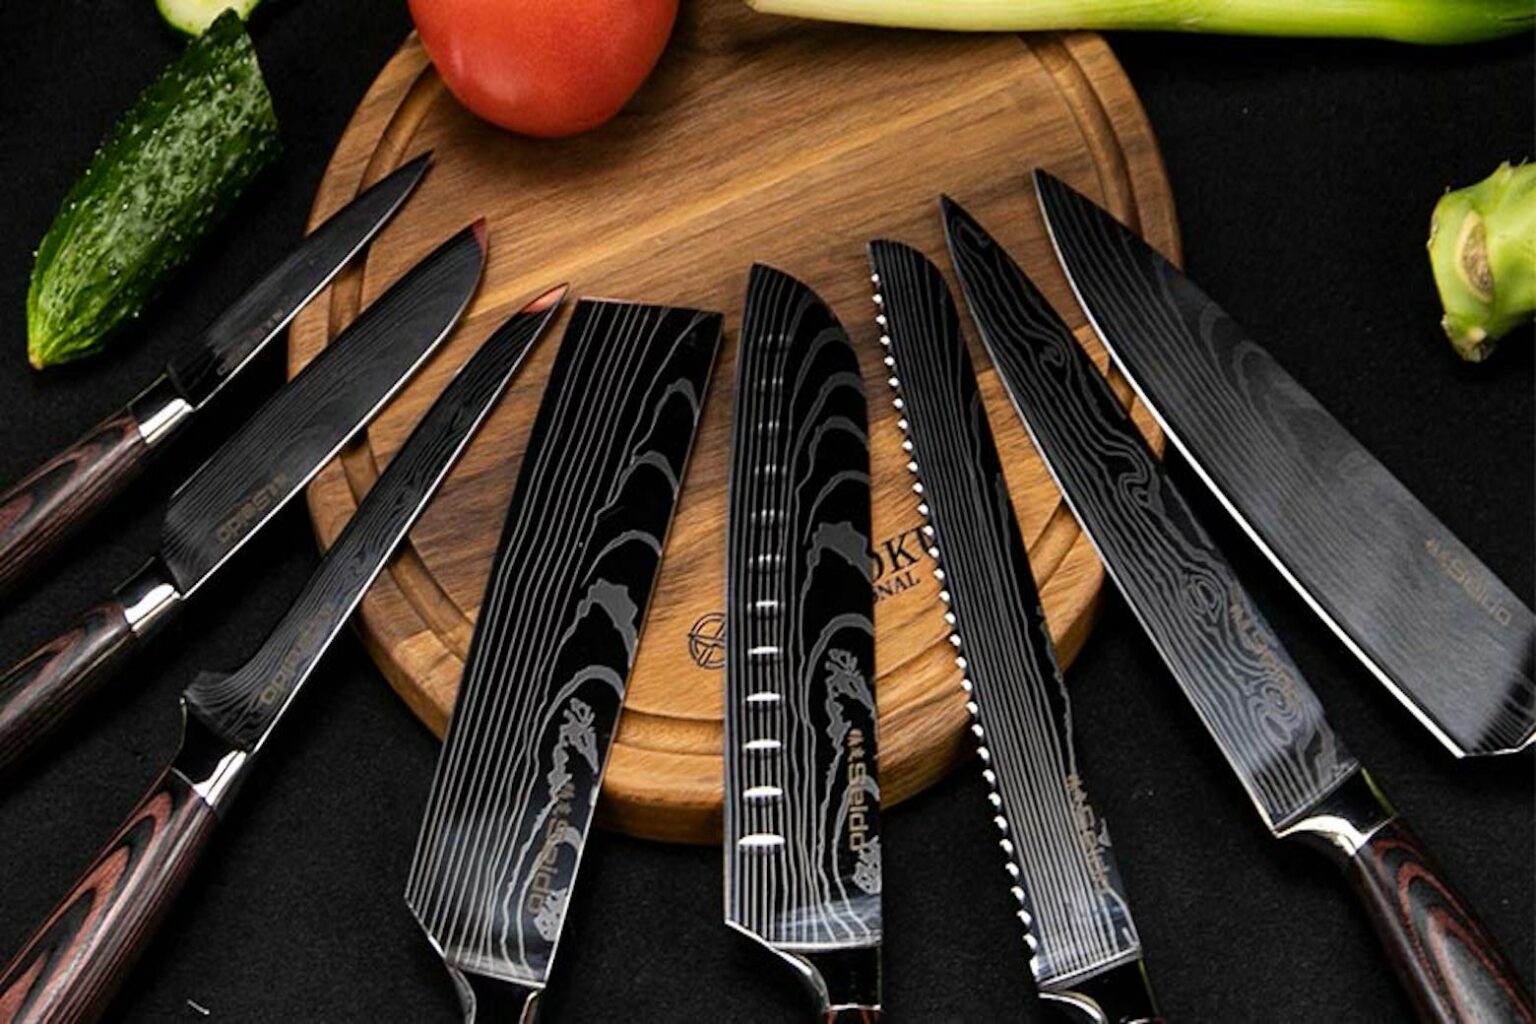 These high-carbon steel knives are some cutting edge stuff with a price that has been slashed.